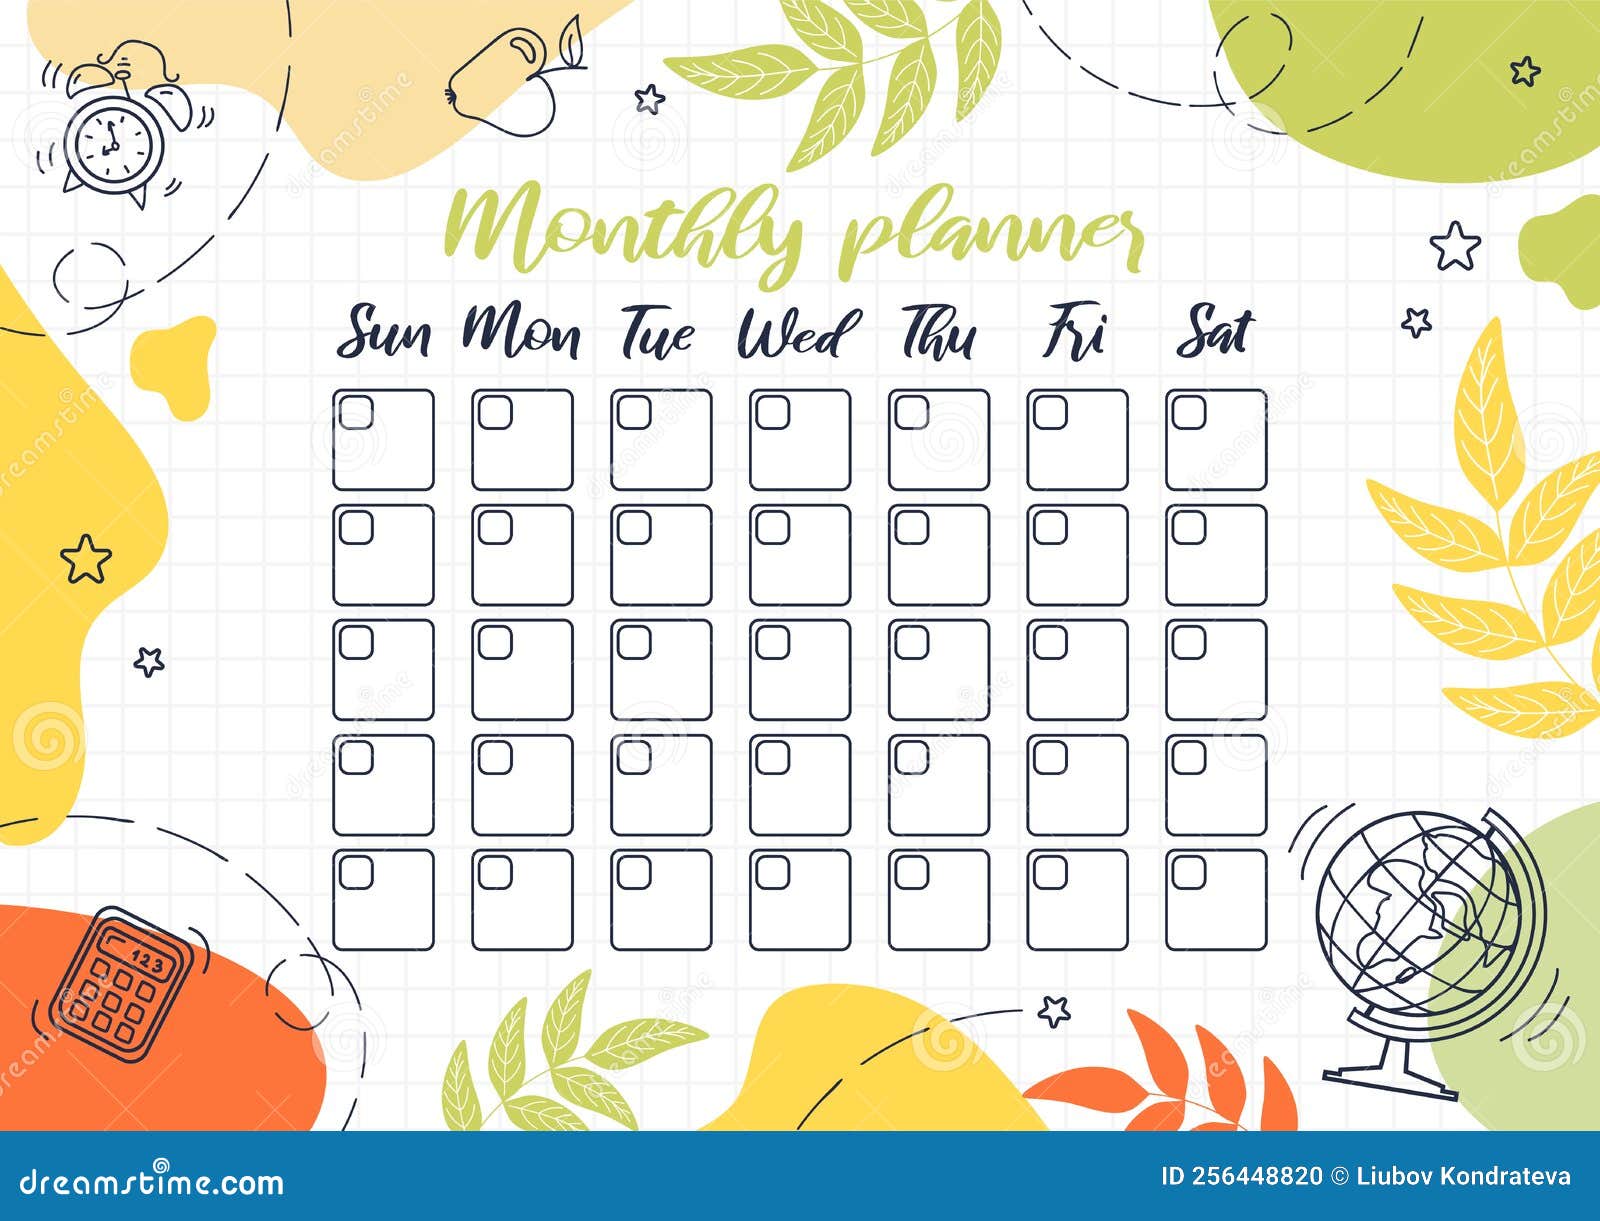 Monthly Planner: Free Monthly Schedule Planner Template